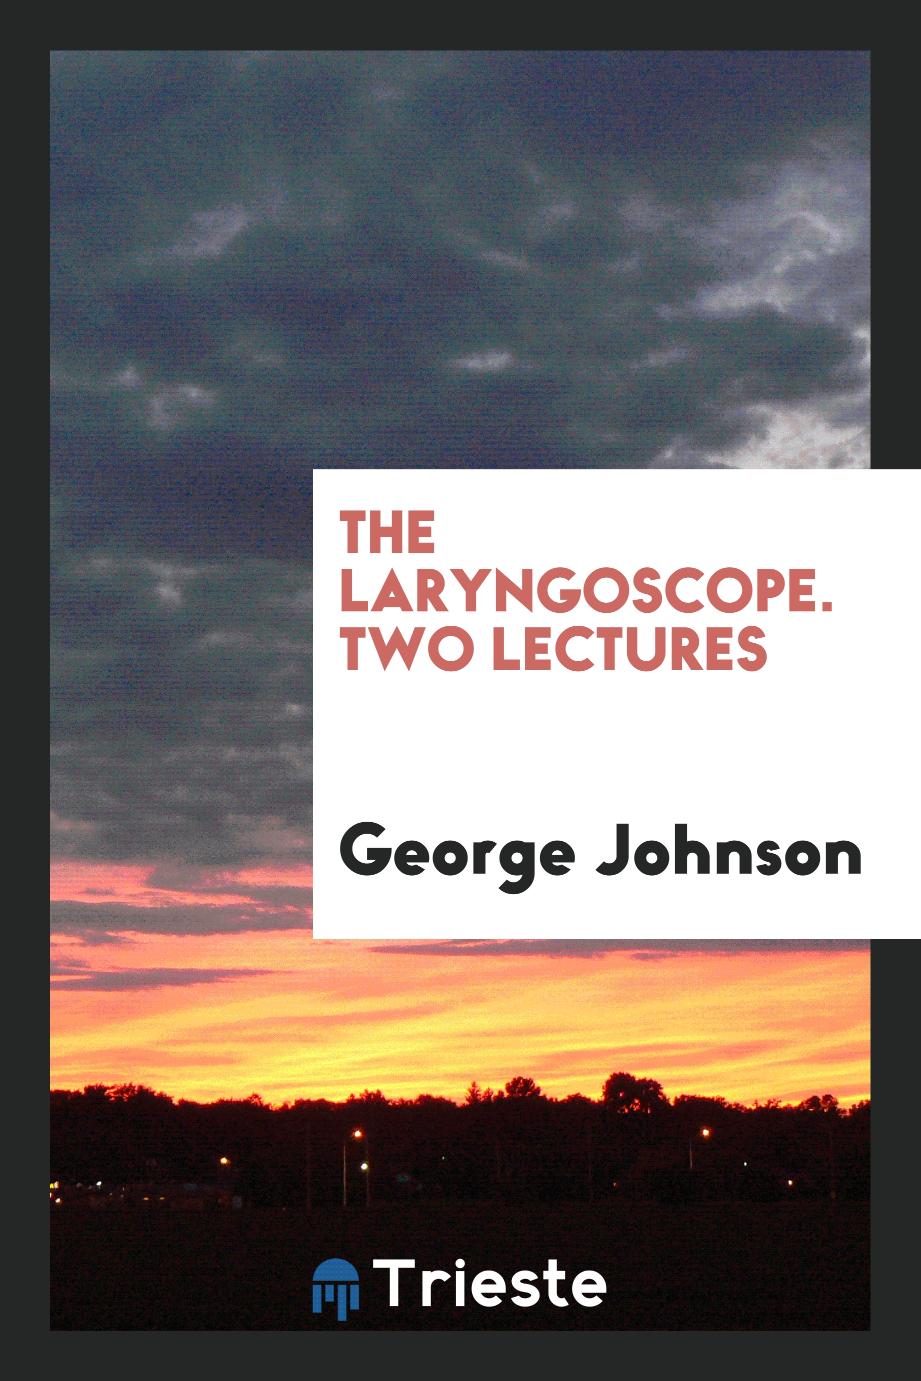 The laryngoscope. Two lectures